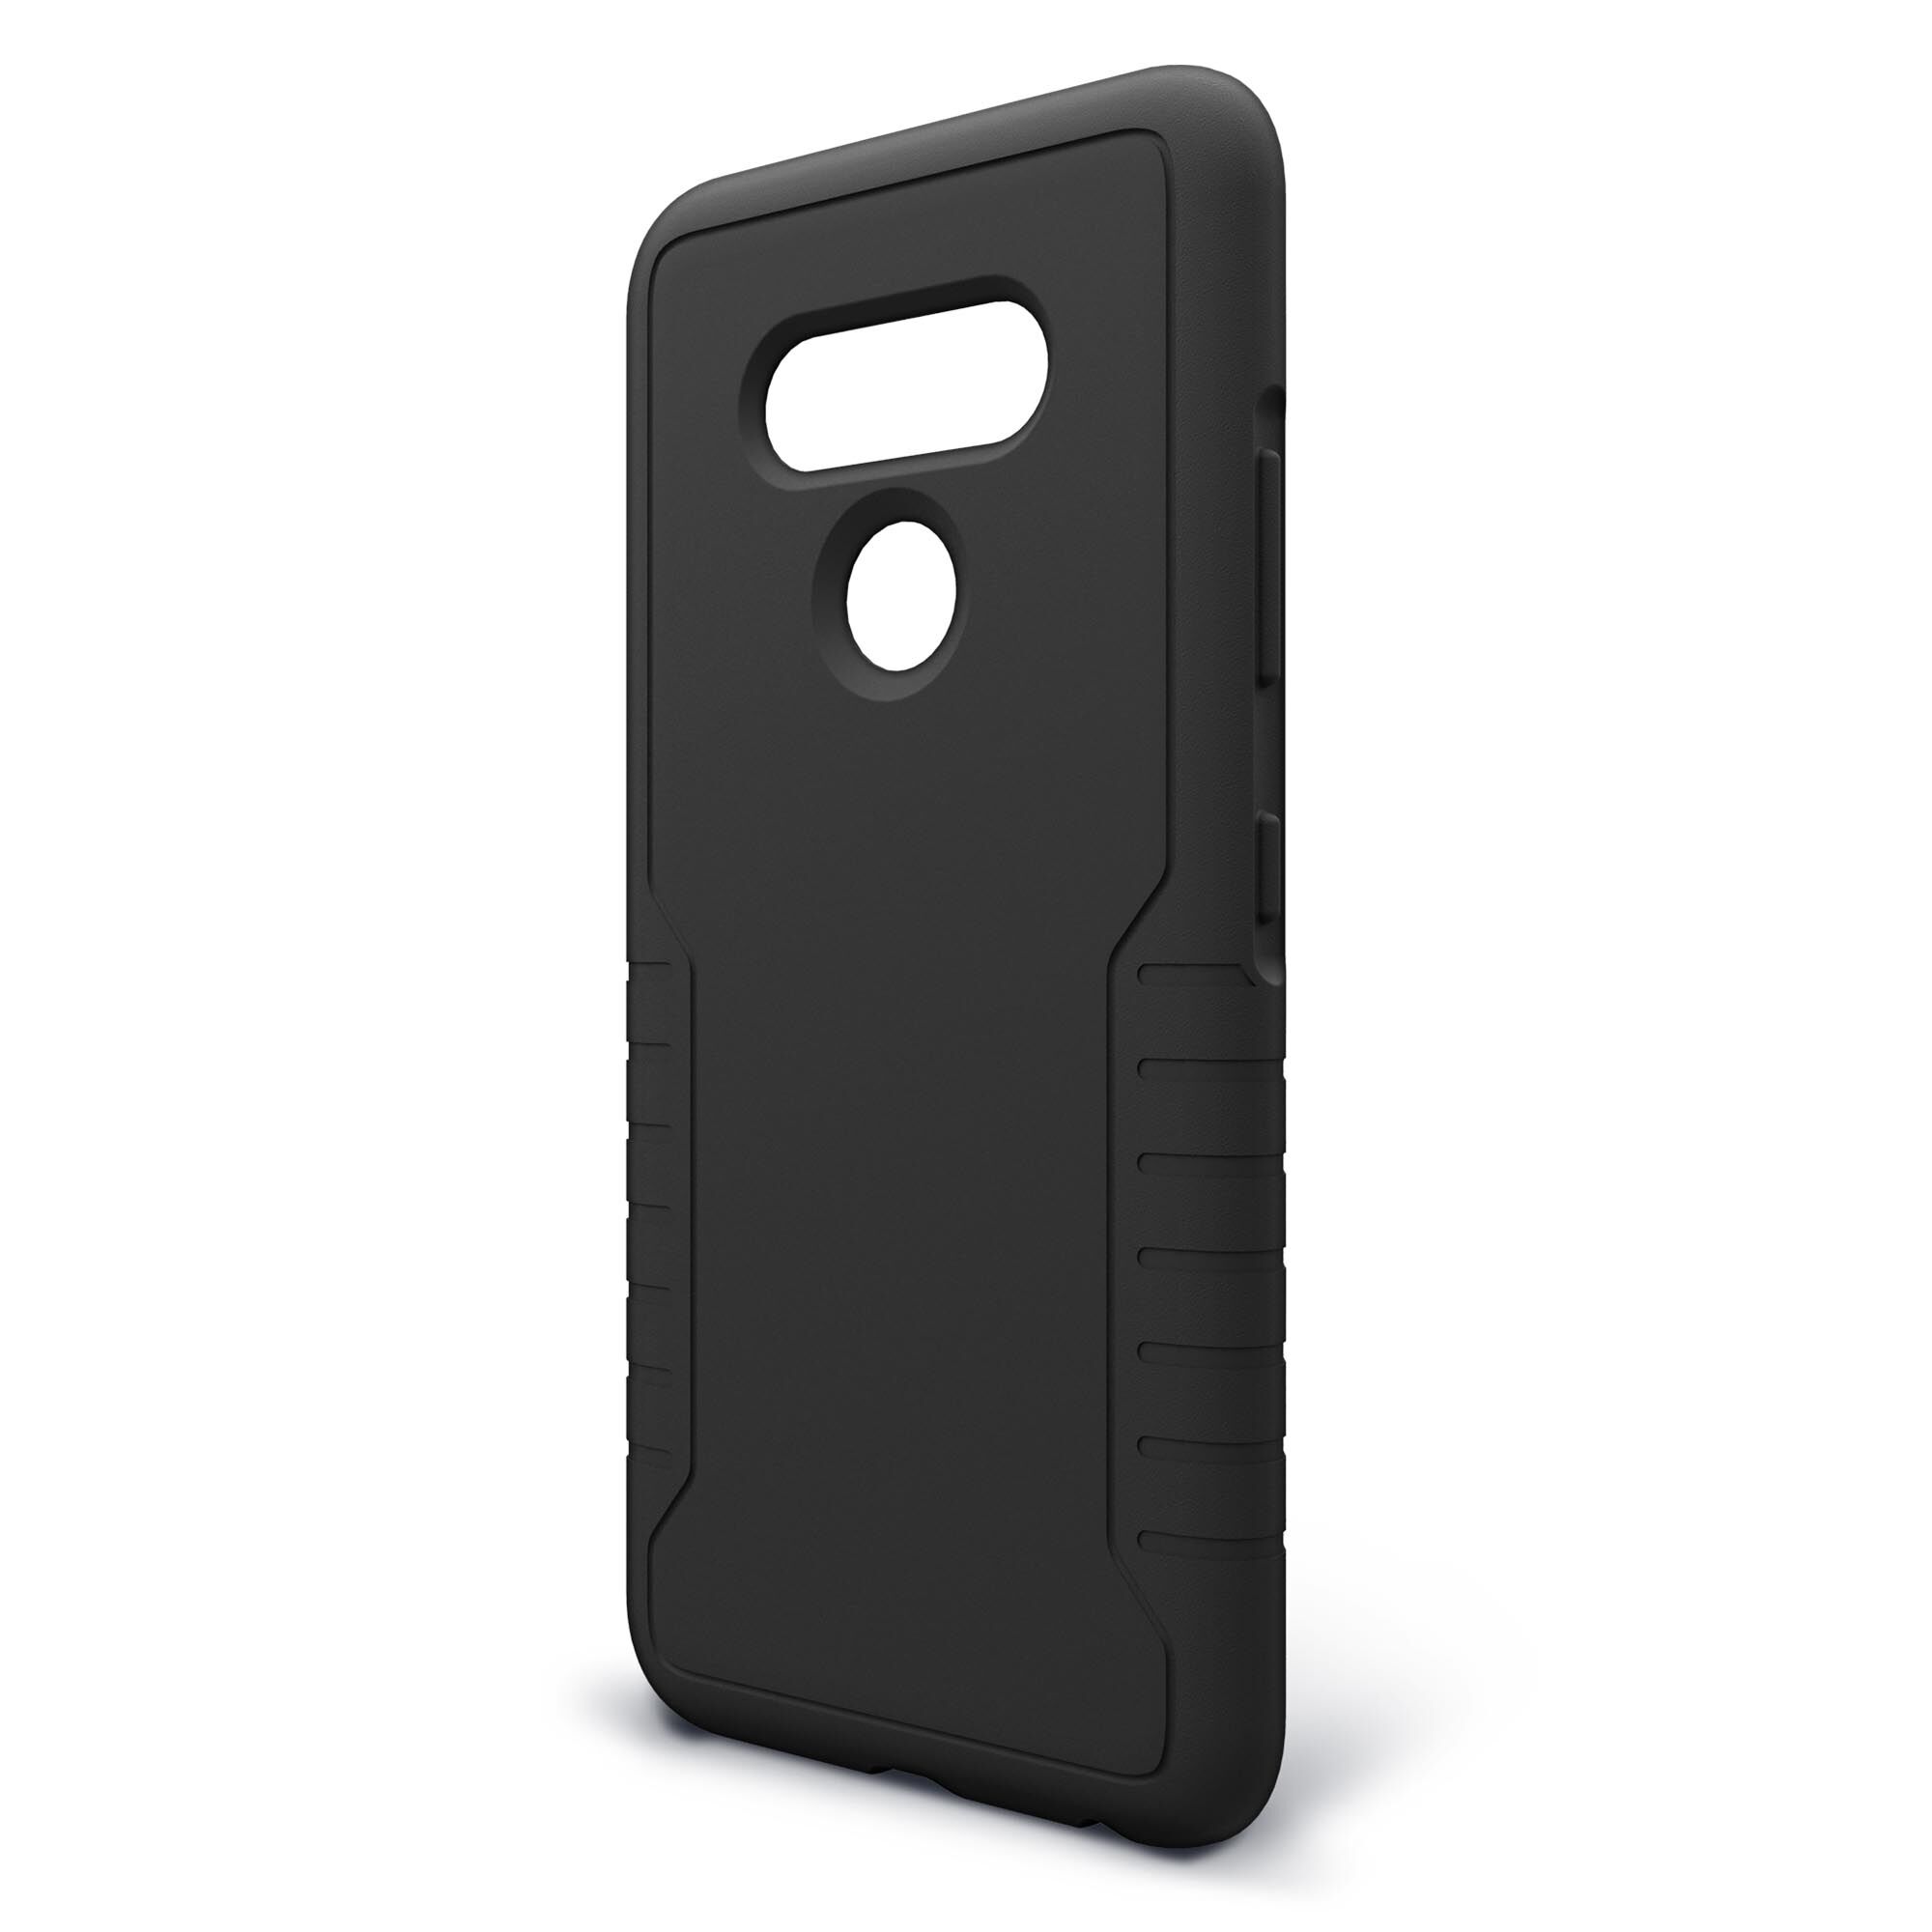 BodyGuardz Shock™ Case with Unequal® Technology for LG V40 ThinQ